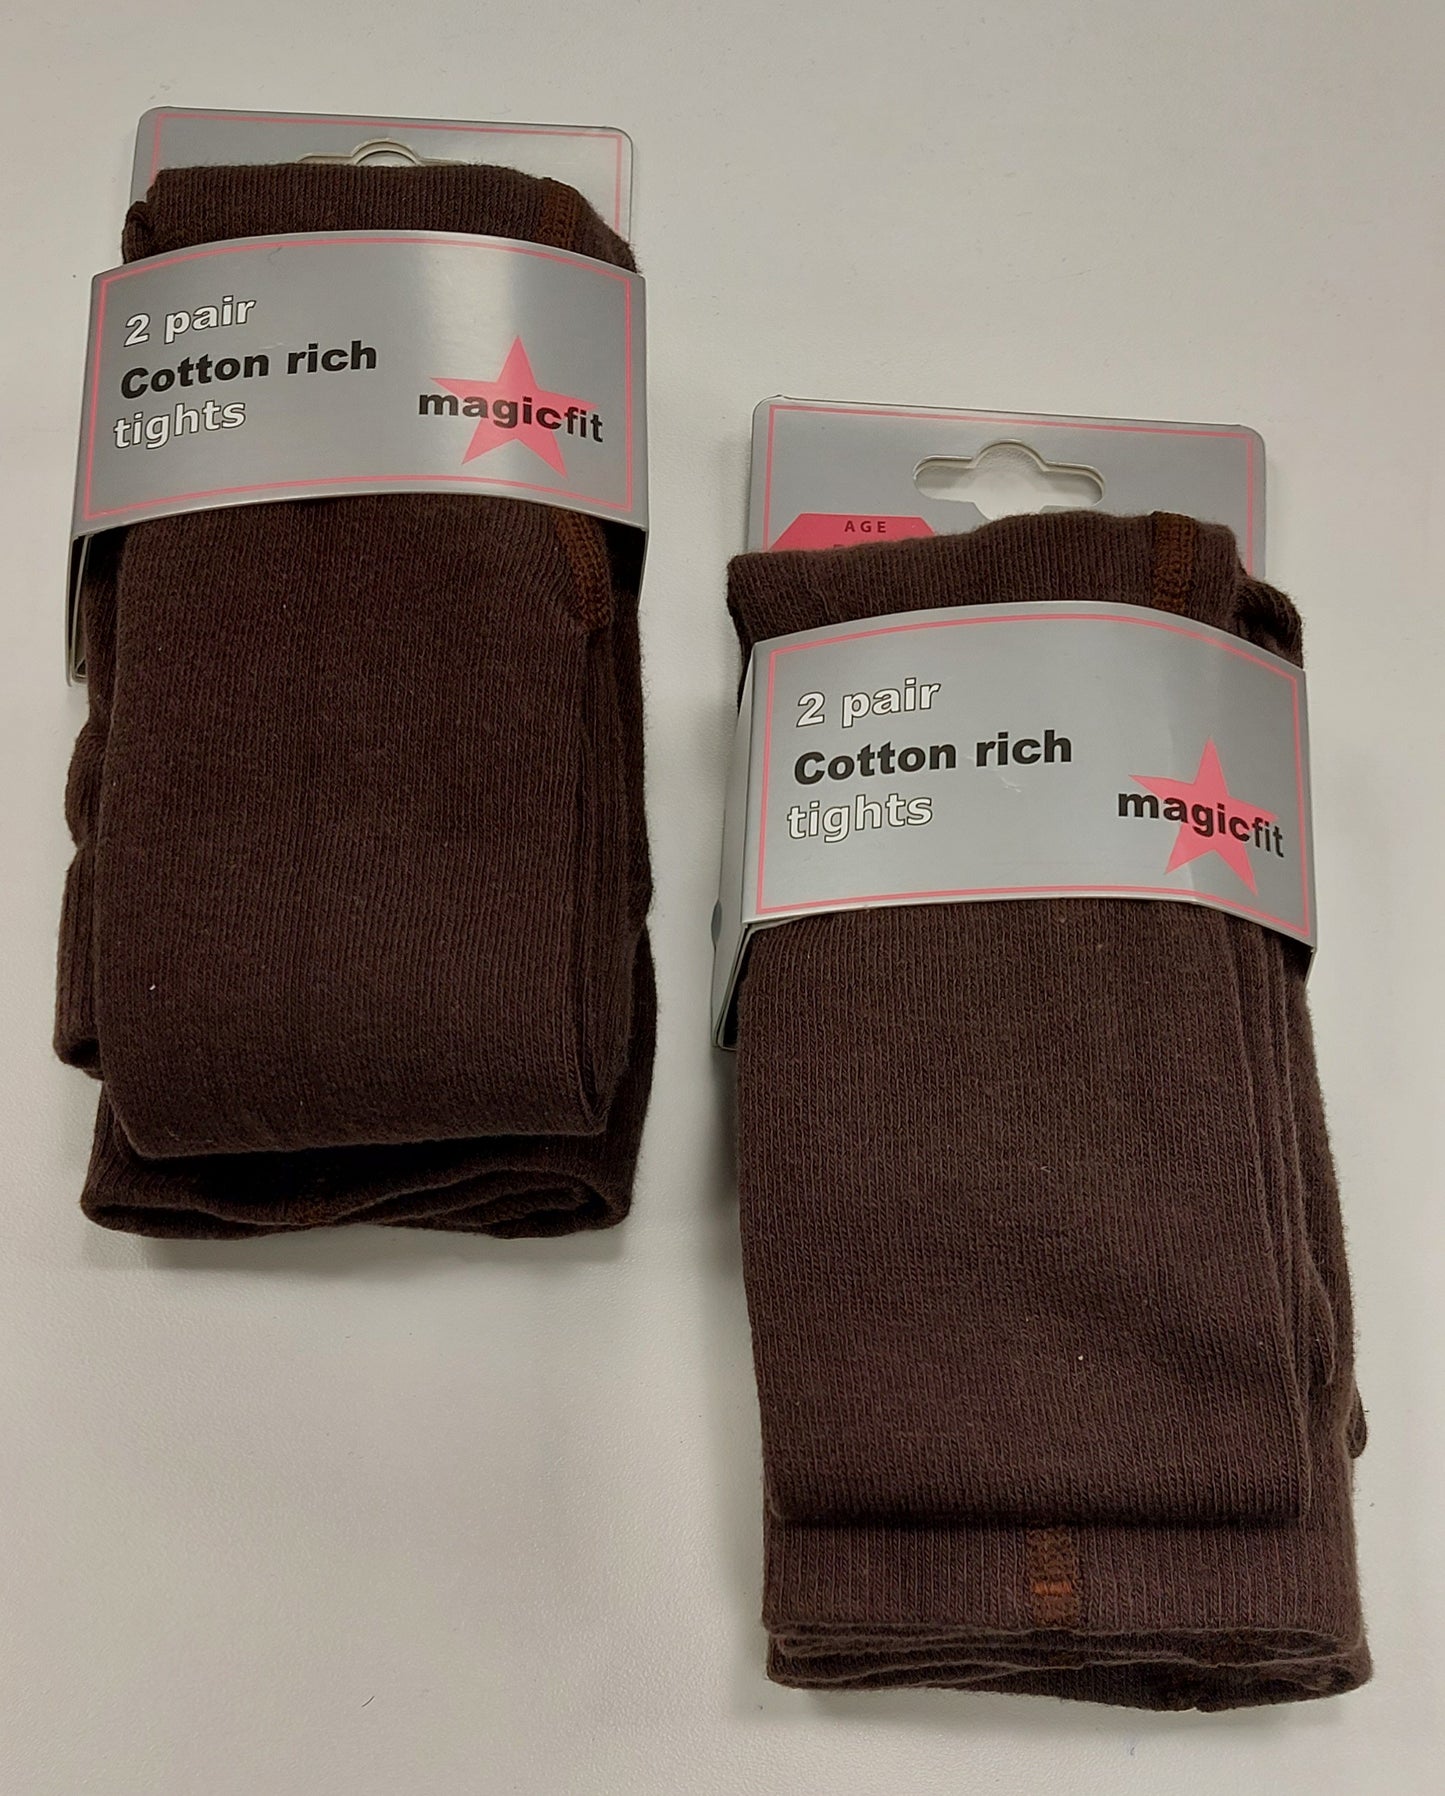 Brown tights  78 % cotton rich  2 pack